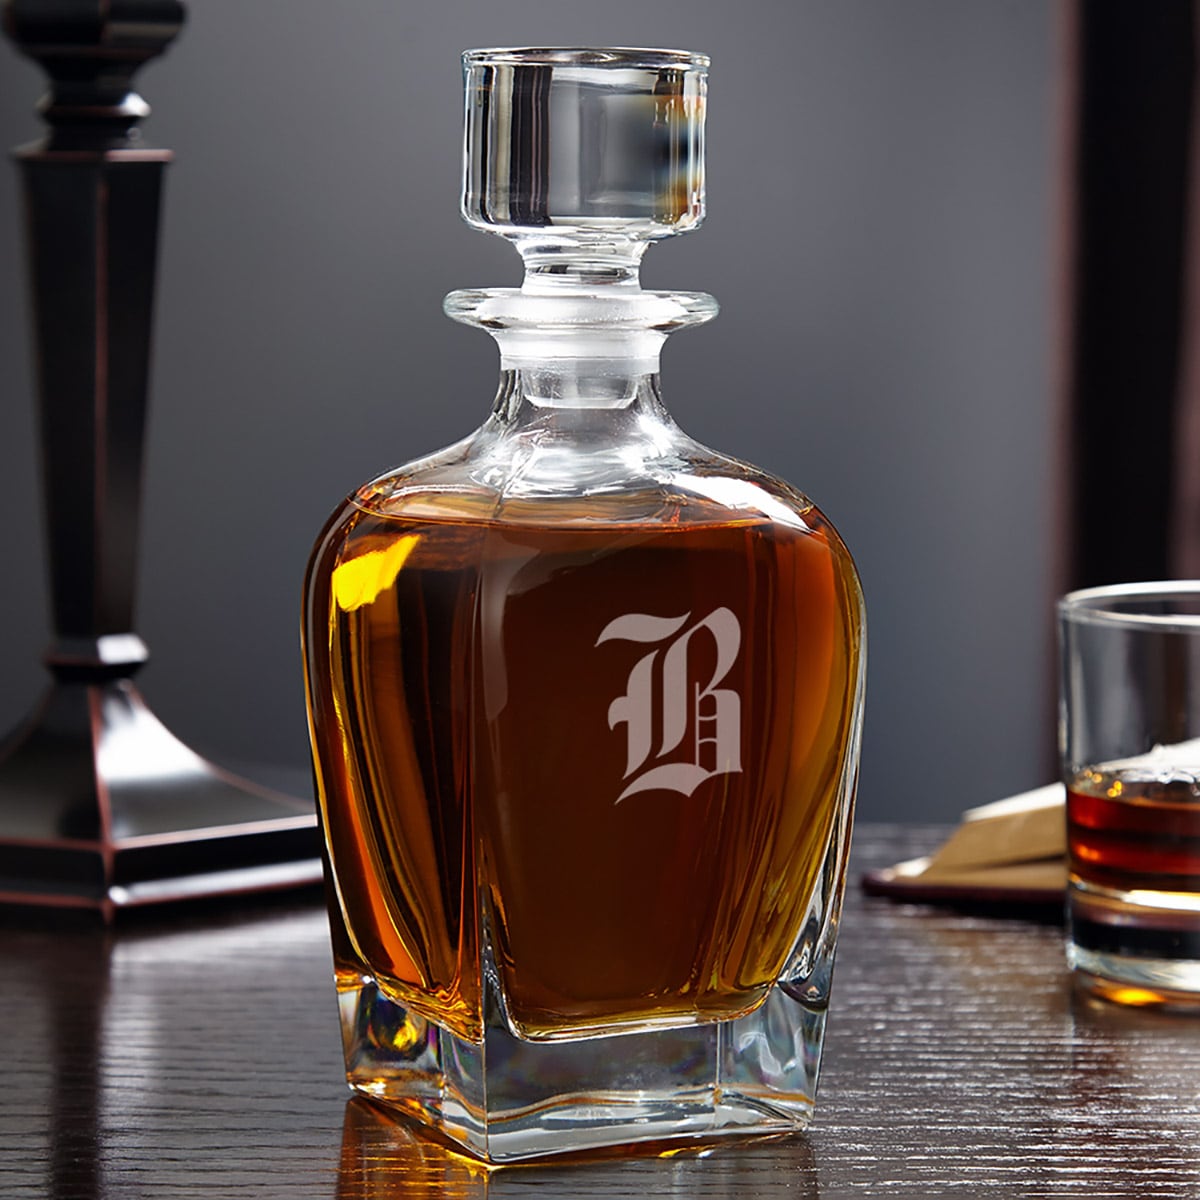 Draper Personalized Whiskey Decanter